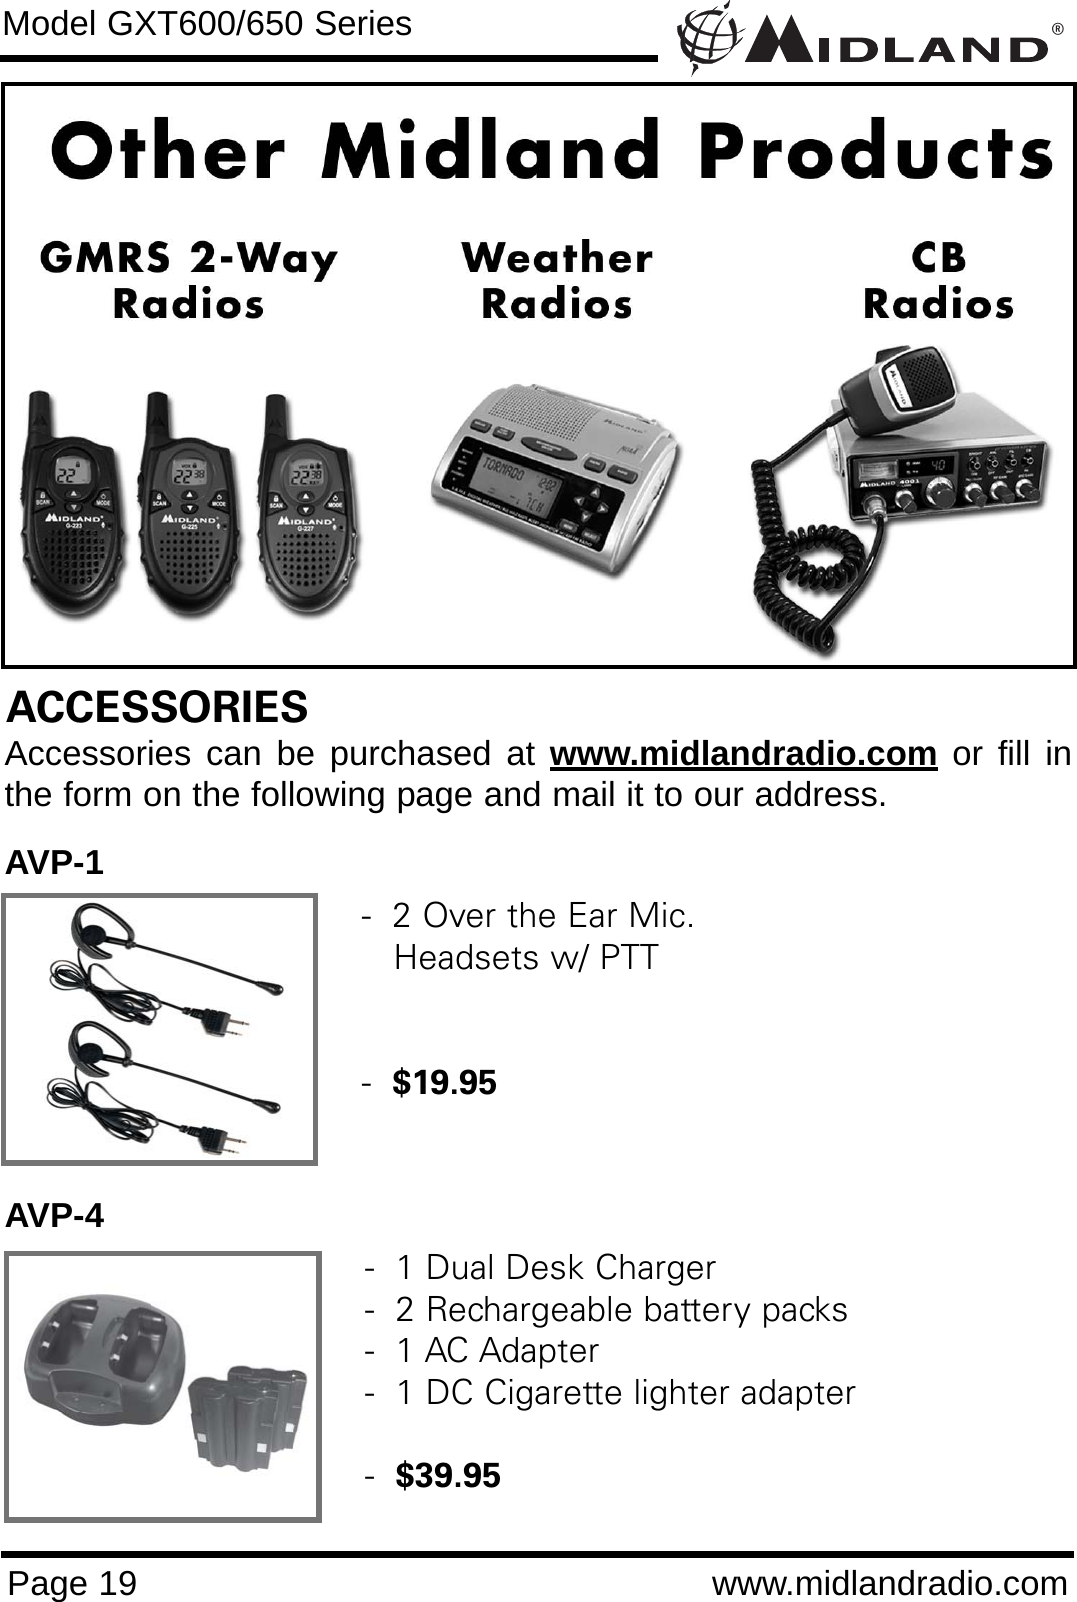 ®Page 19 www.midlandradio.comModel GXT600/650 SeriesACCESSORIESAccessories can be purchased at www.midlandradio.com or fill inthe form on the following page and mail it to our address.AVP-1AVP-4-  2 Over the Ear Mic. Headsets w/ PTT-  $19.95-  1 Dual Desk Charger-  2 Rechargeable battery packs-  1 AC Adapter-  1 DC Cigarette lighter adapter-  $39.95